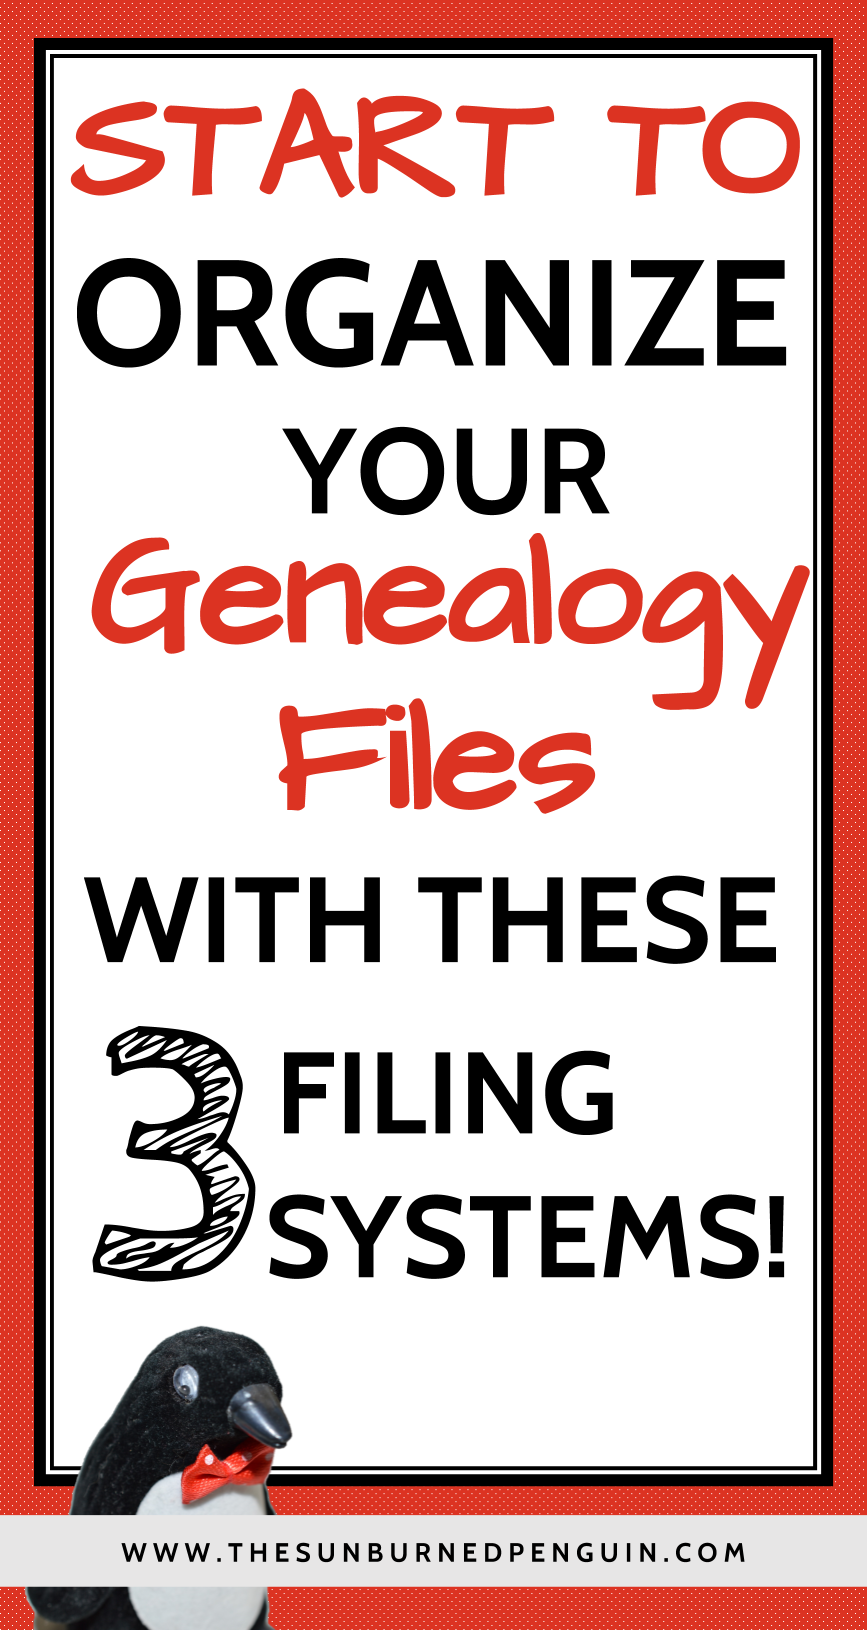 Start to organize your genealogy files with these 3 filing systems!